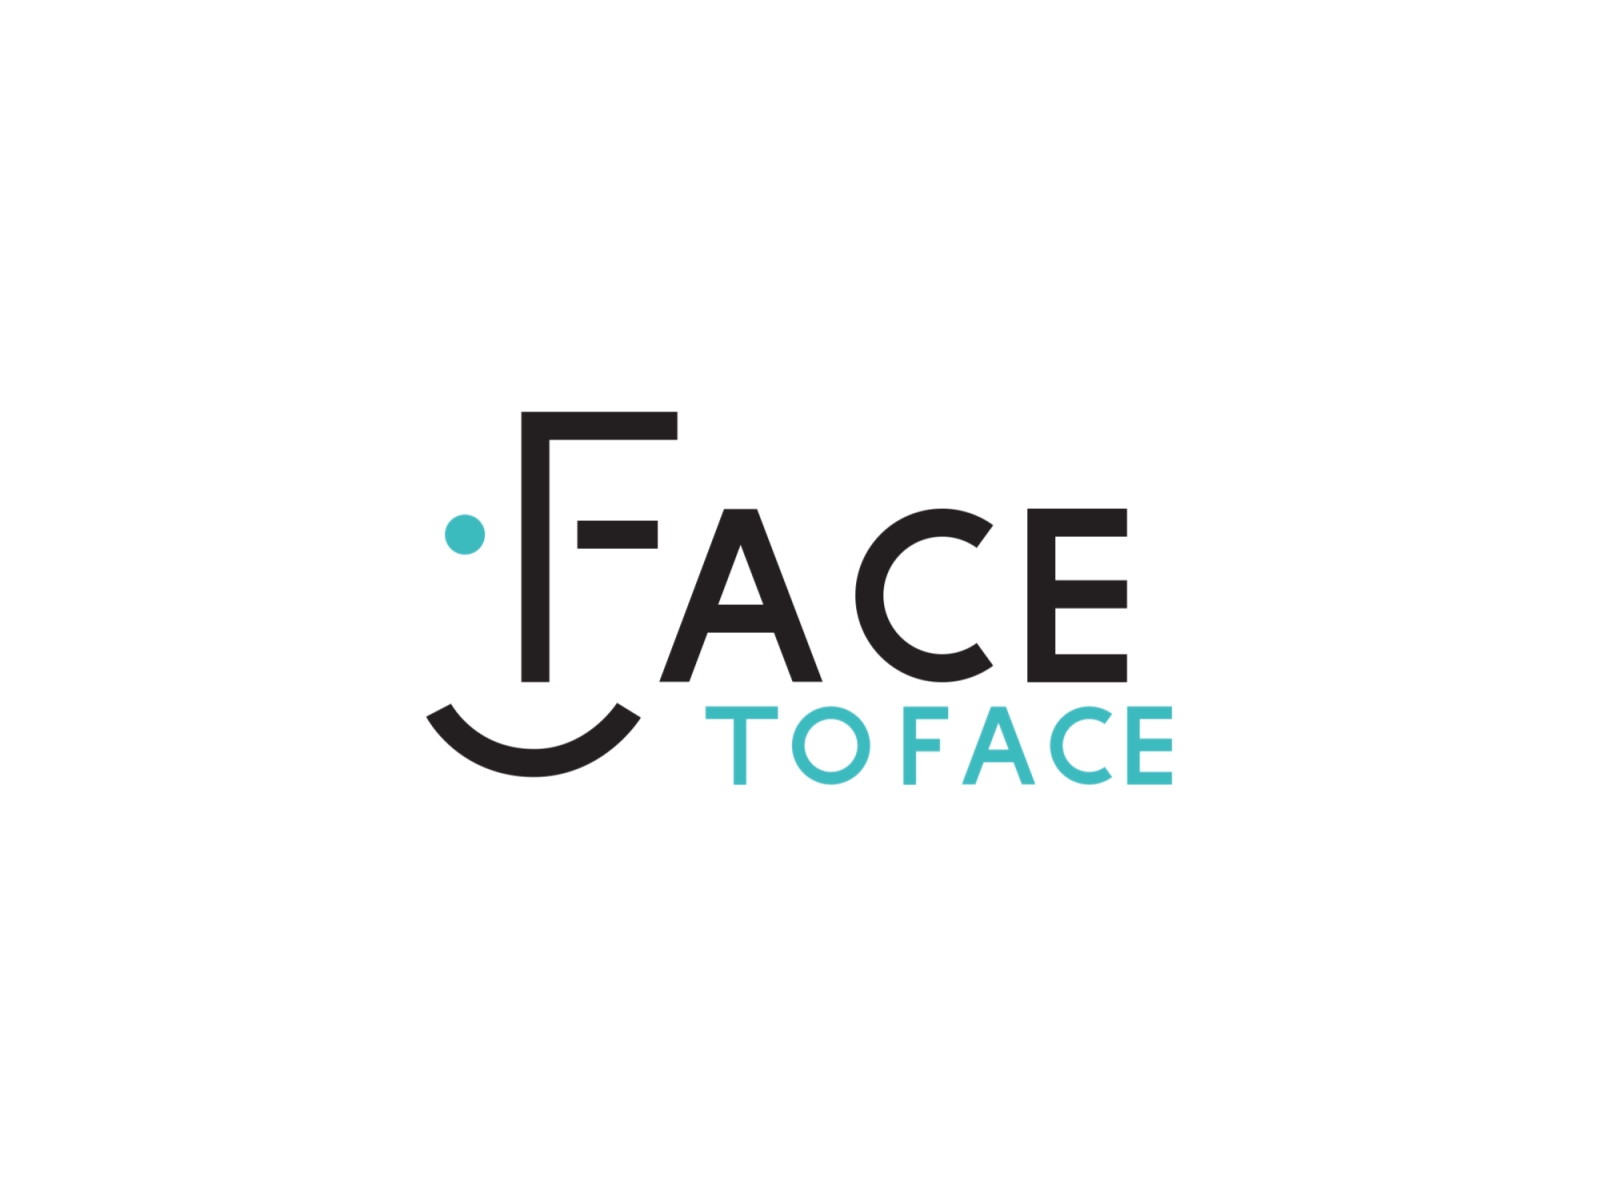 Face to face 2d art 2danimation adobeaftereffects aftereffects animation bounce design flat logo logoanimation logomotion motion motion design motion graphic motiondesign motiondesigner motiondesigners motiongraphics